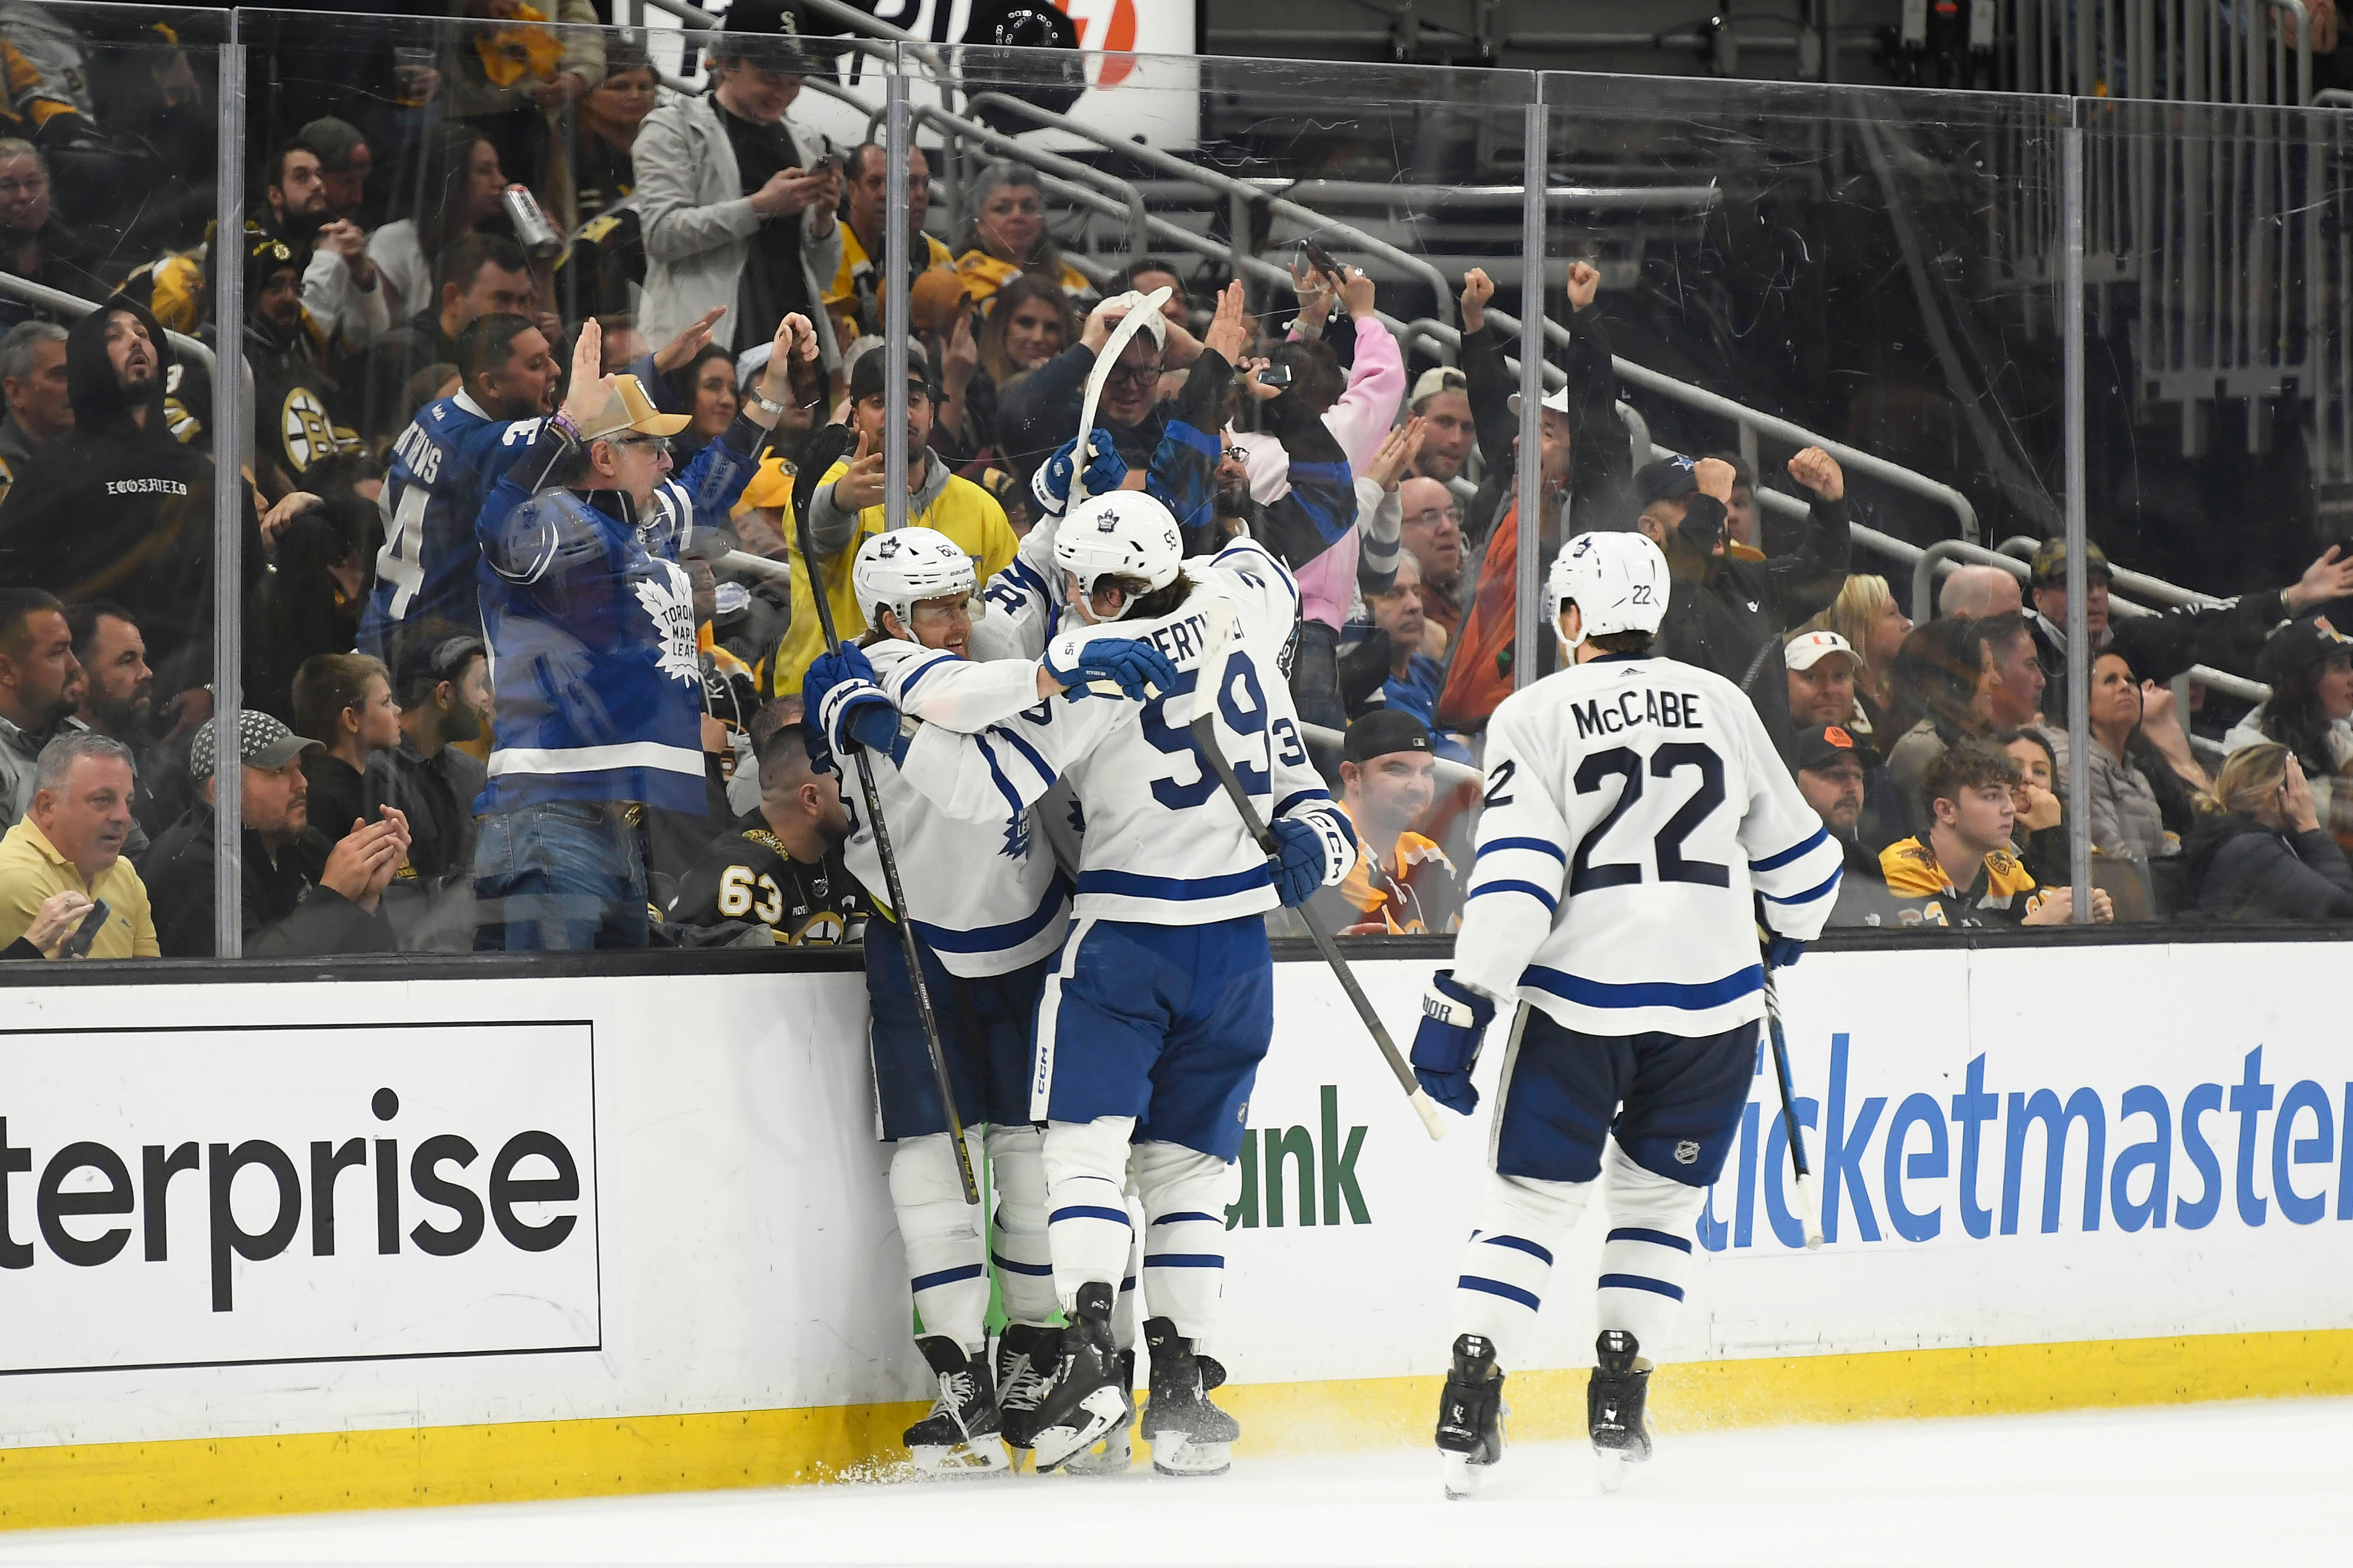 NHL: Stanley Cup Playoffs-Toronto Maple Leafs at Boston Bruins